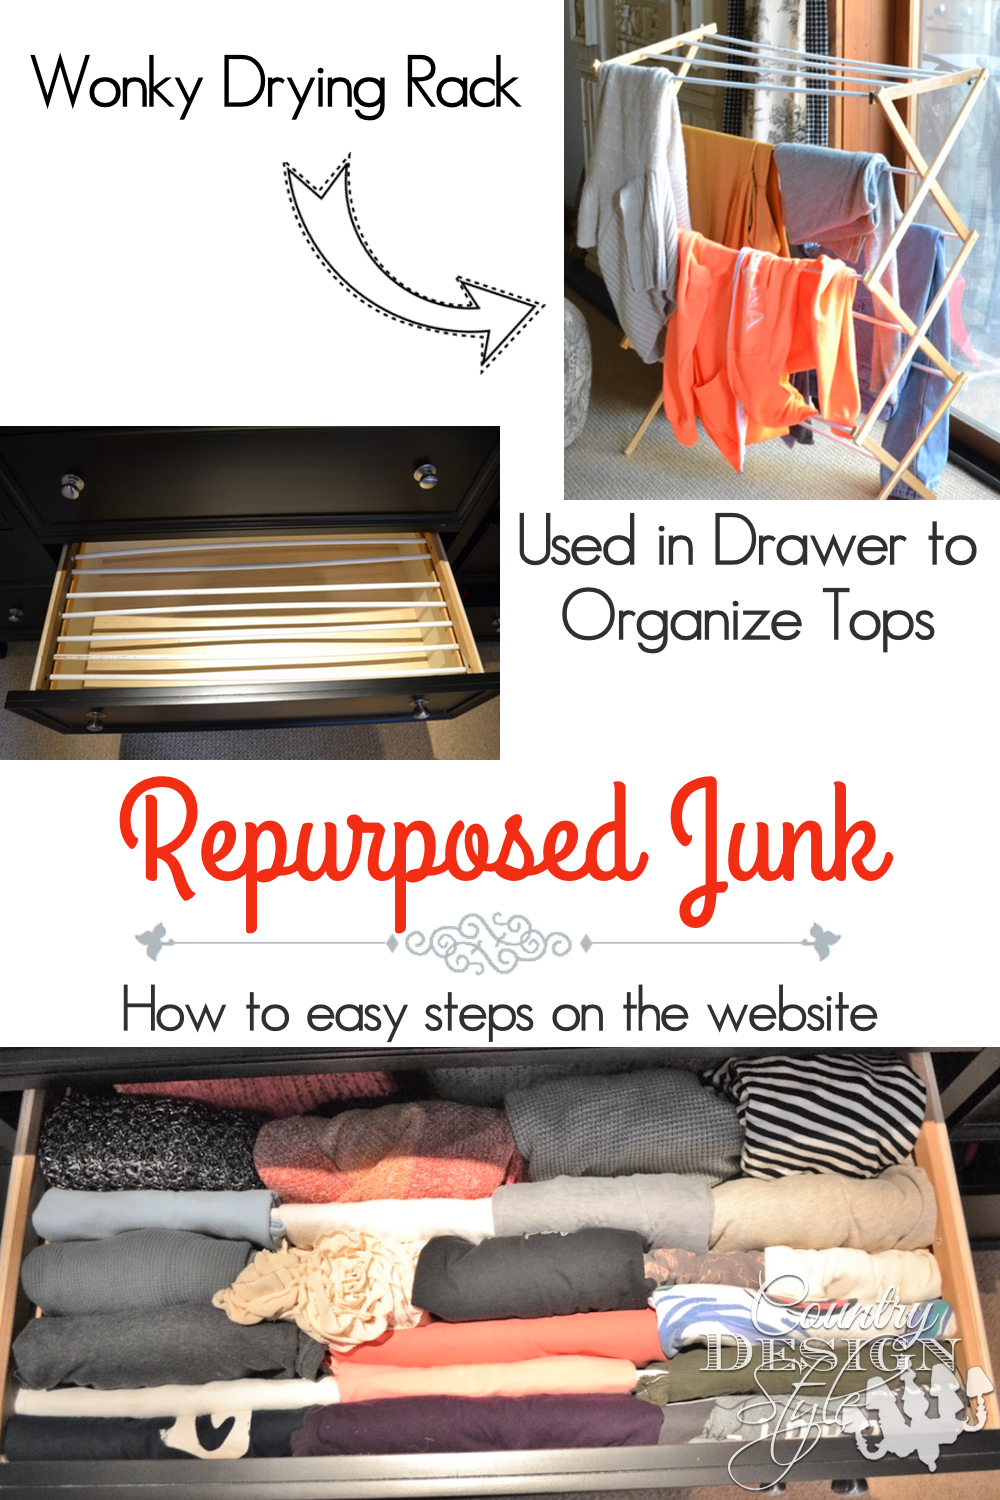 Repurposed Junk Drying Rack Pin | Country Design Style | countrydesignstyle.com